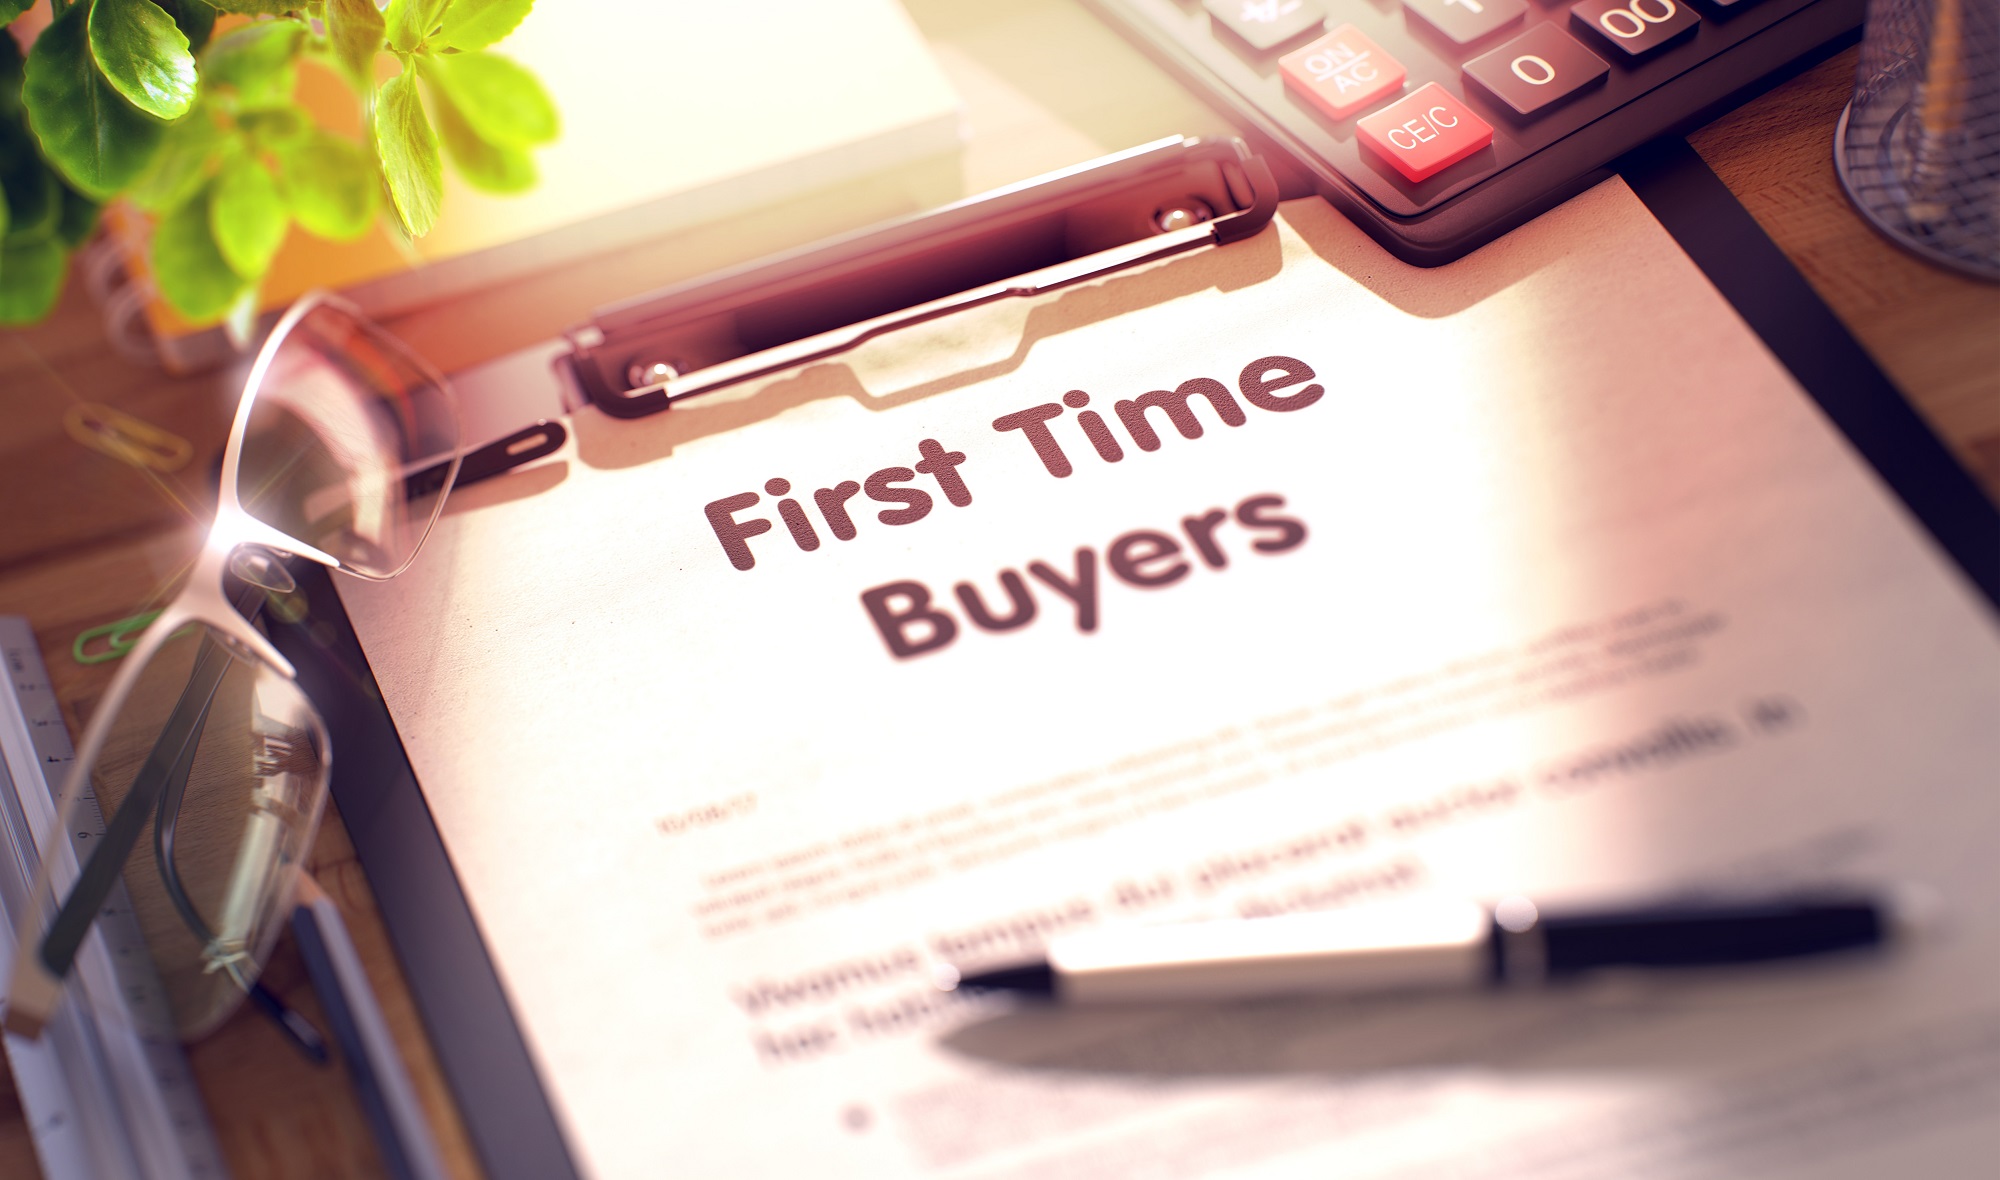 Everything you need to know as a firsttime buyer